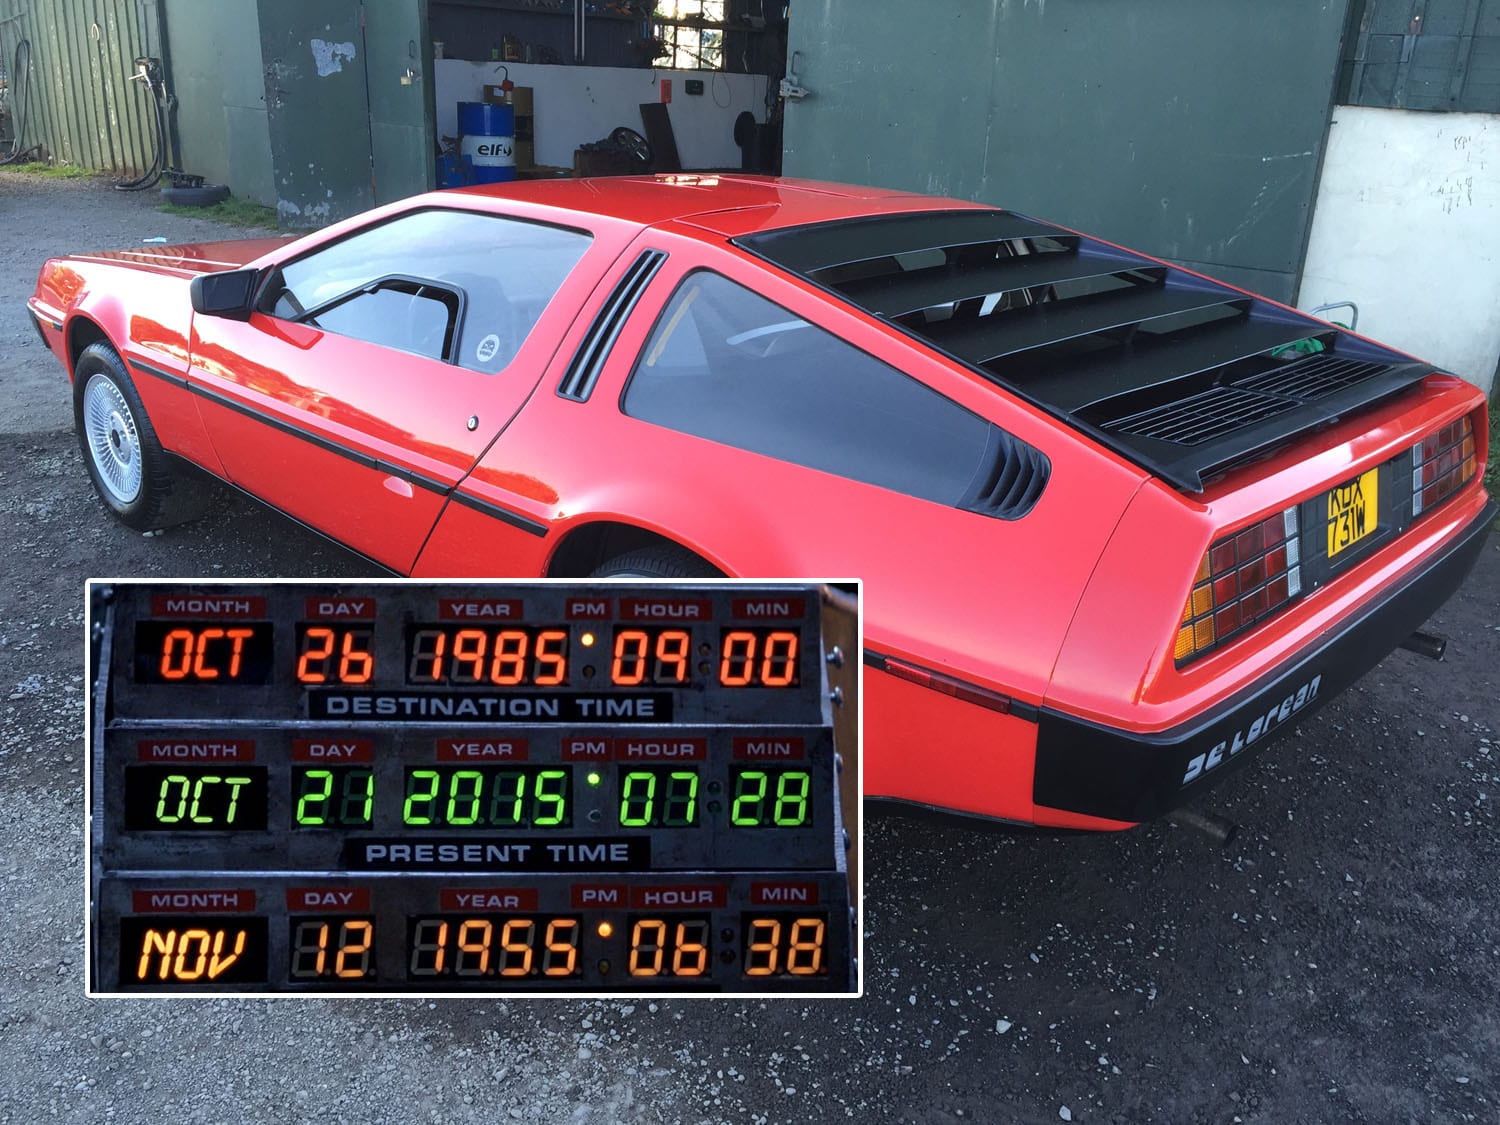 The DeLorean on sale in Moira along with the actual timestamp from the movie